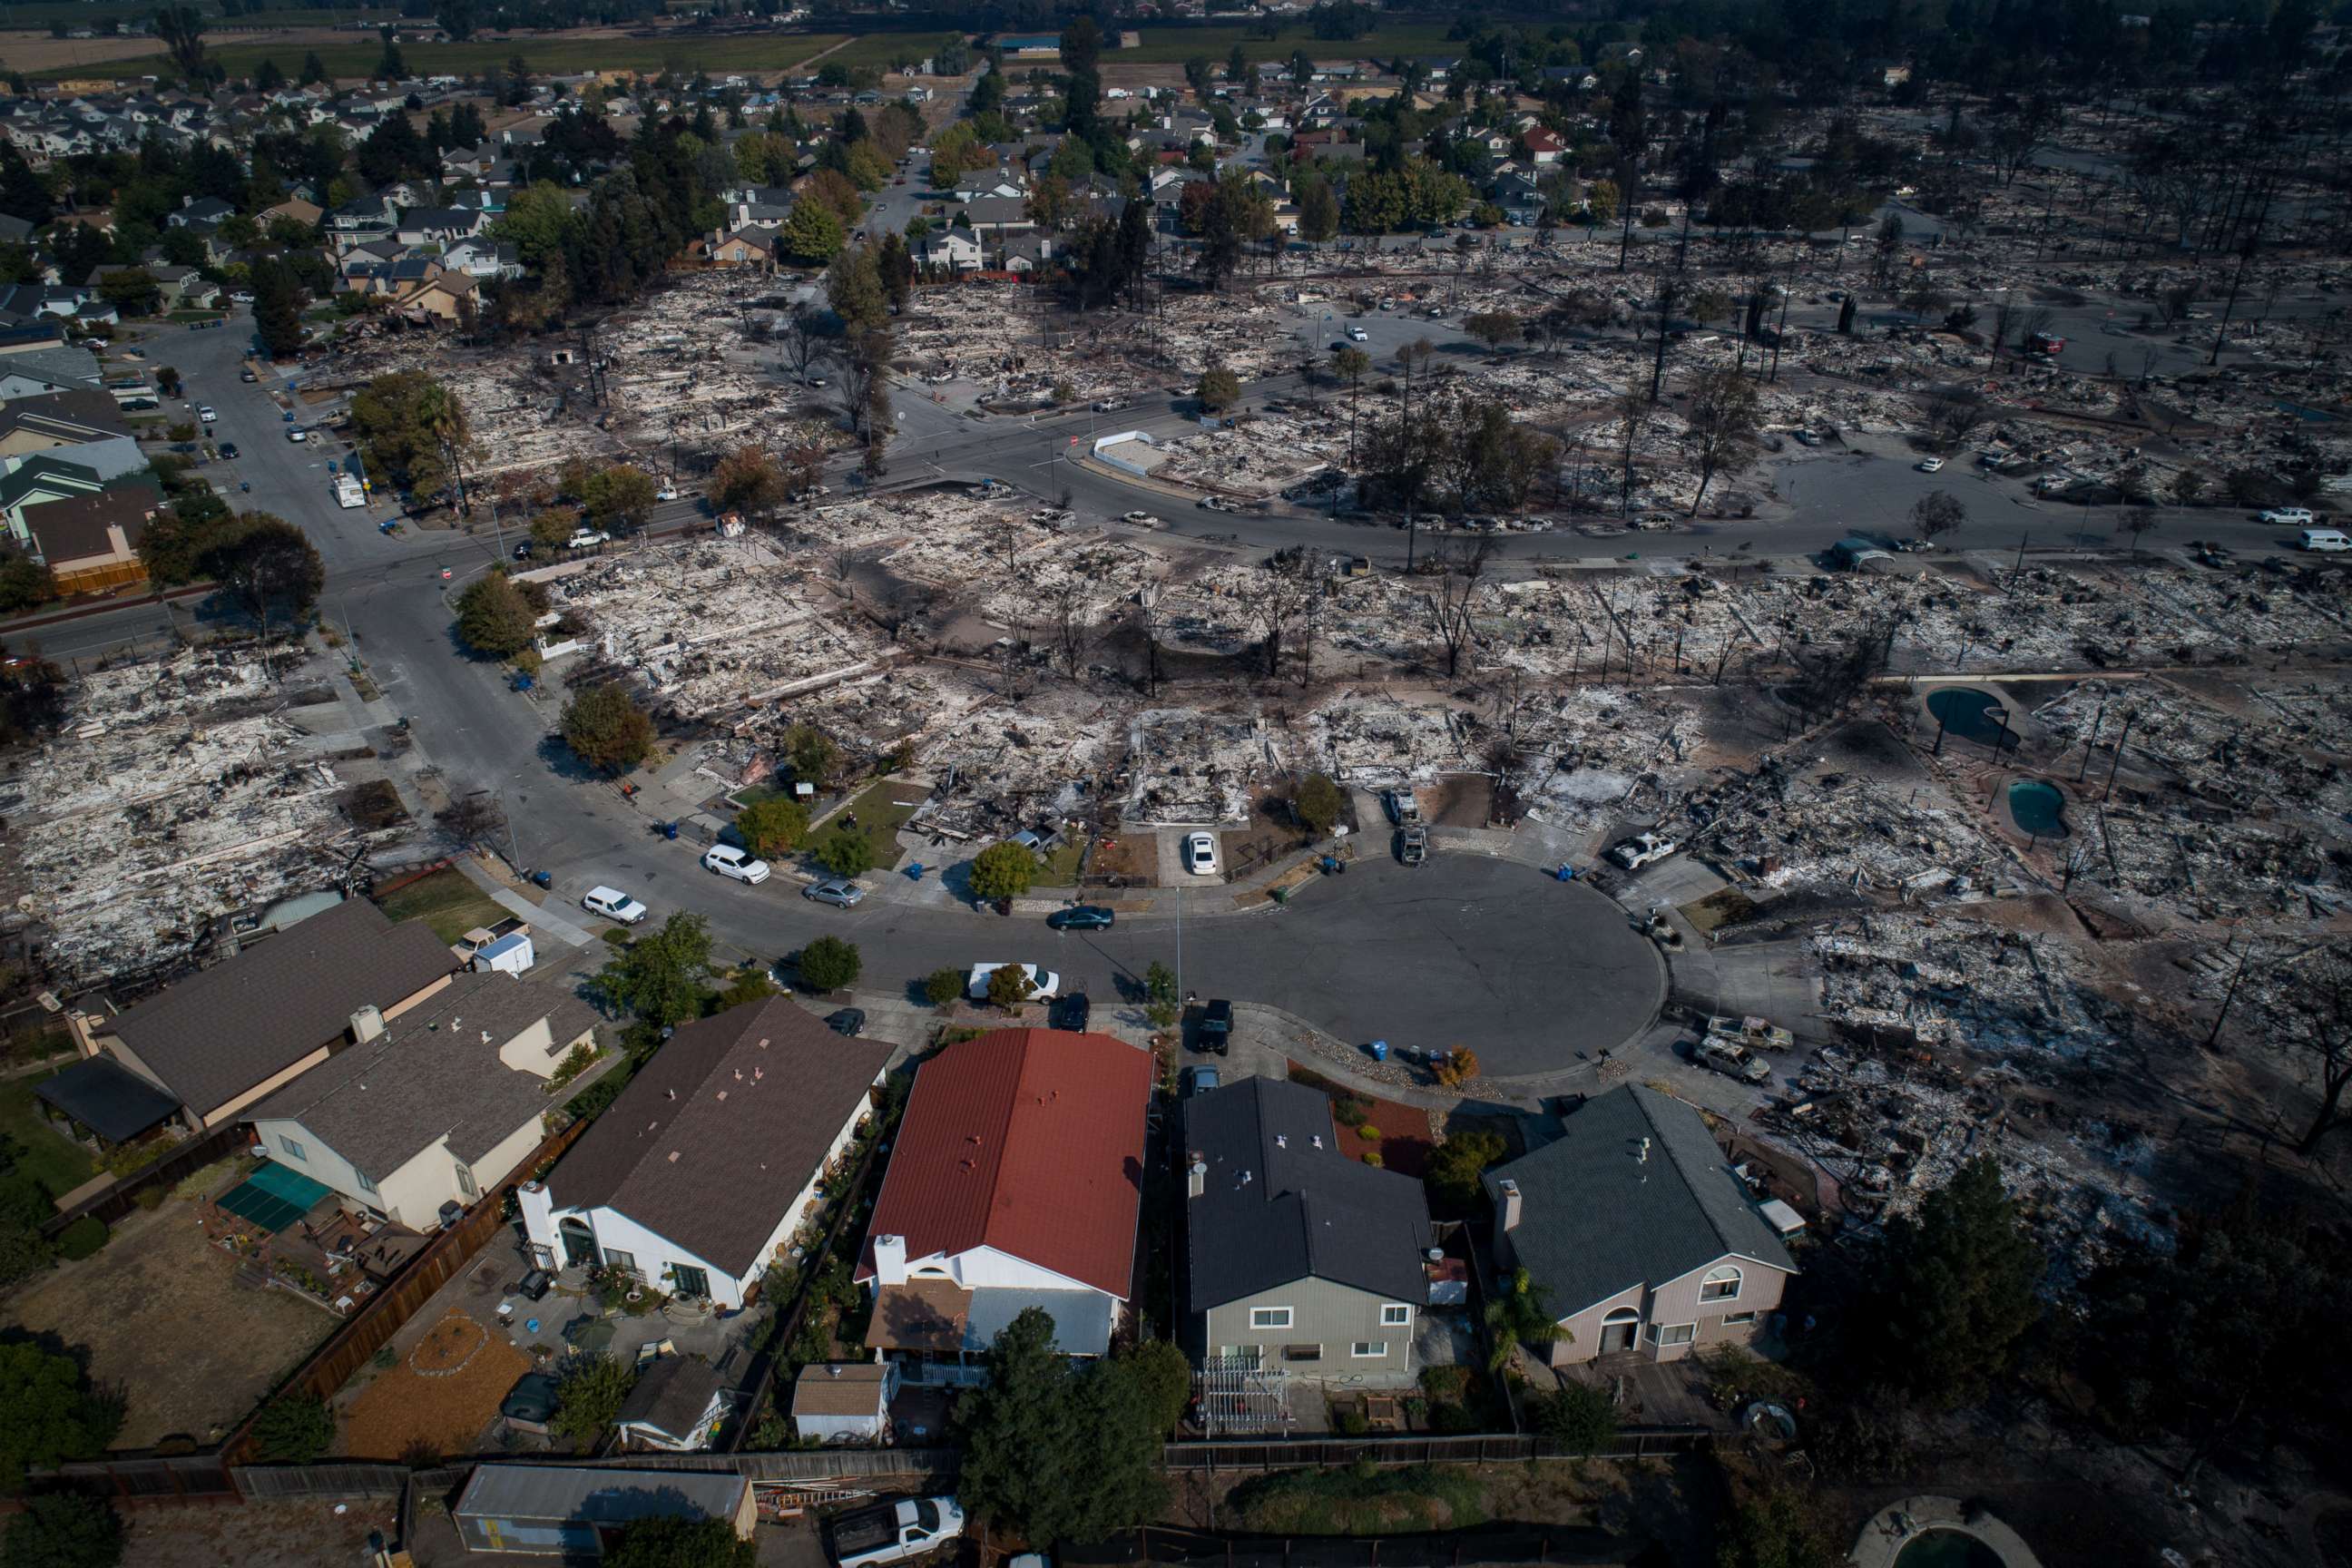 PHOTO: An aerial photograph shows a handful of homes that escaped destruction by wildfire in the Coffey Park neighborhood of Santa Rosa, Calif., Oct. 11, 2017.